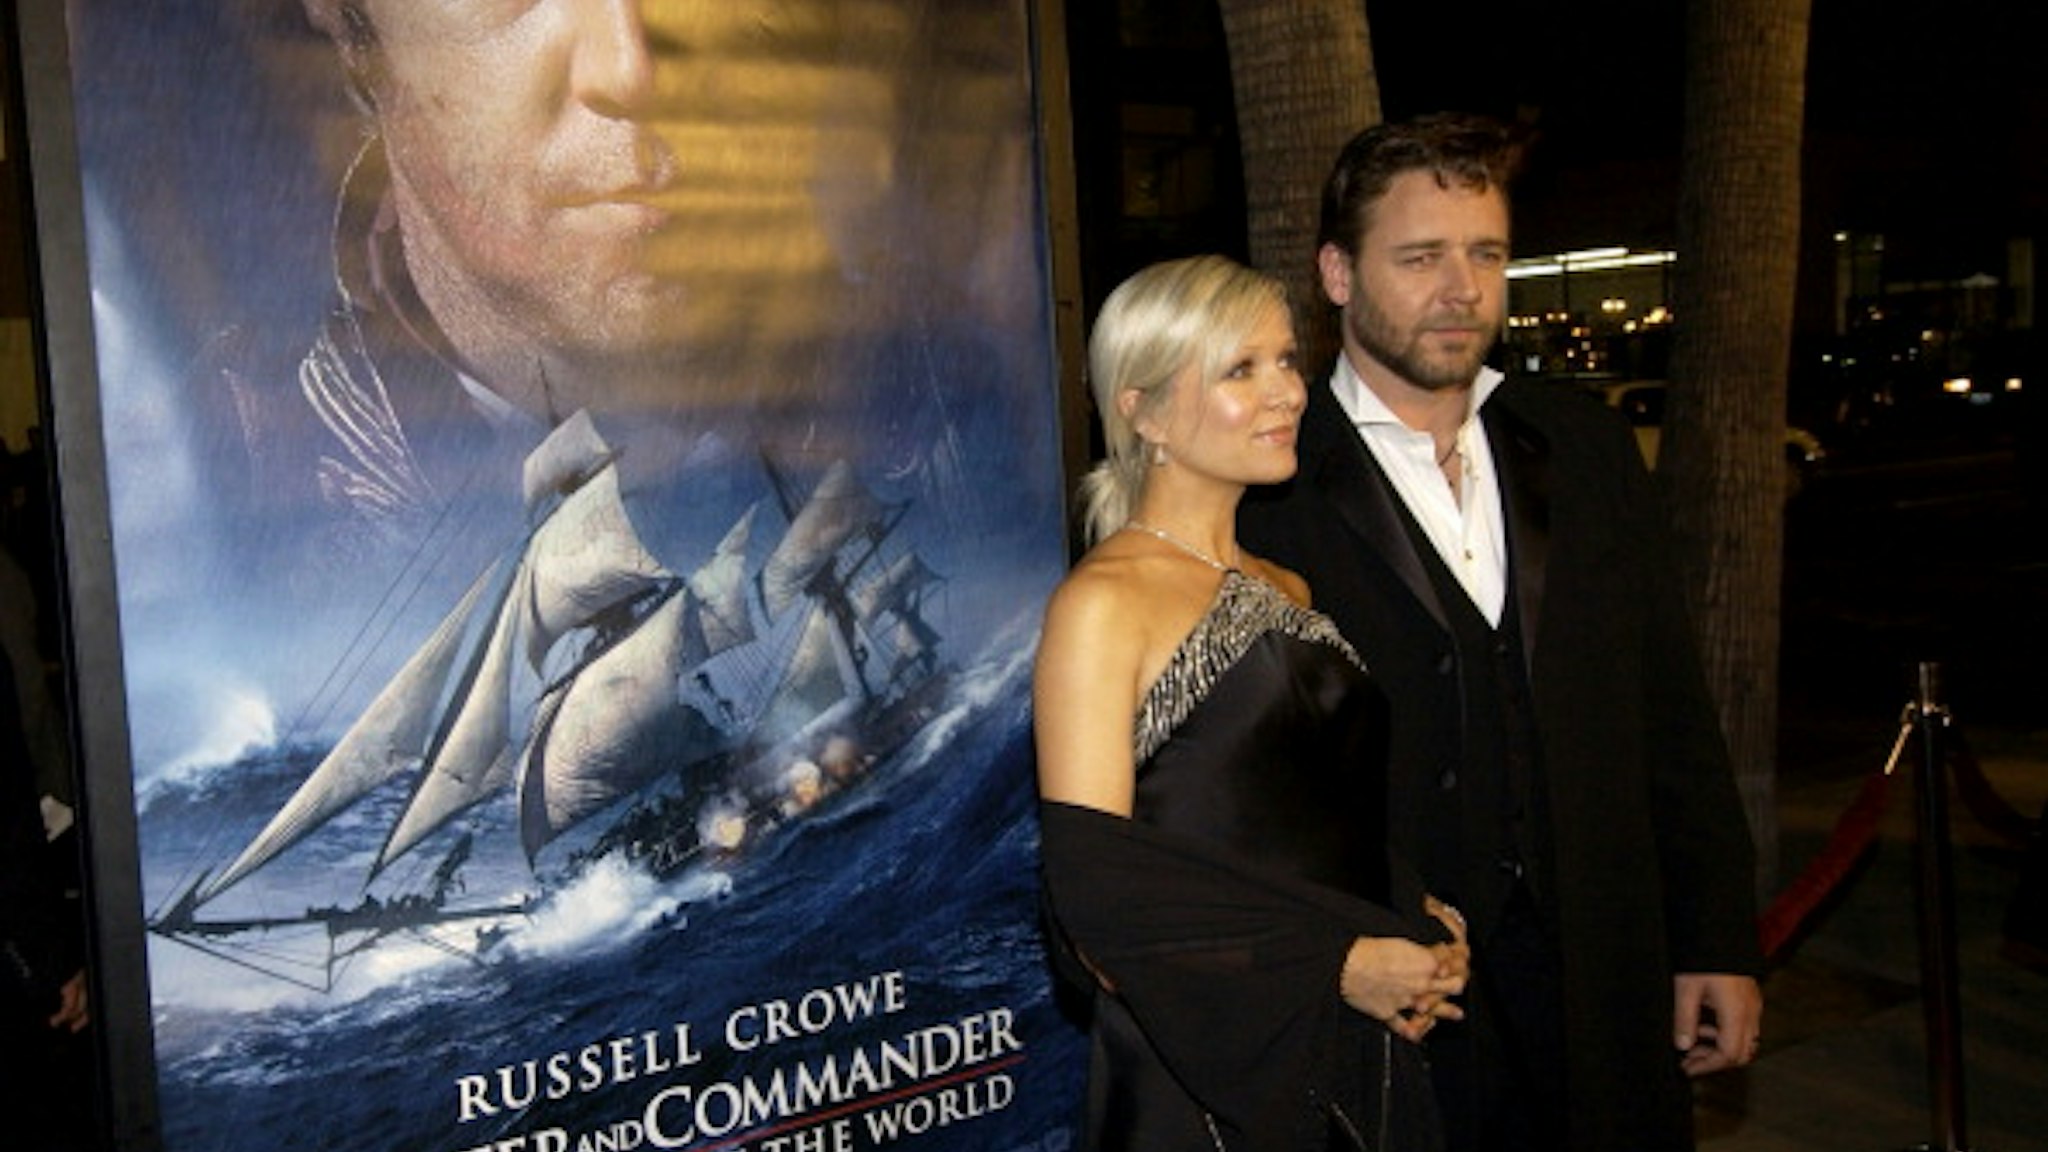 Danielle Spencer and Russell Crowe during "Master &amp; Commander: The Far Side of the World" Los Angeles Premiere - Red Carpet at Samuel Goldwyn Theater in Beverly Hills, California, United States.